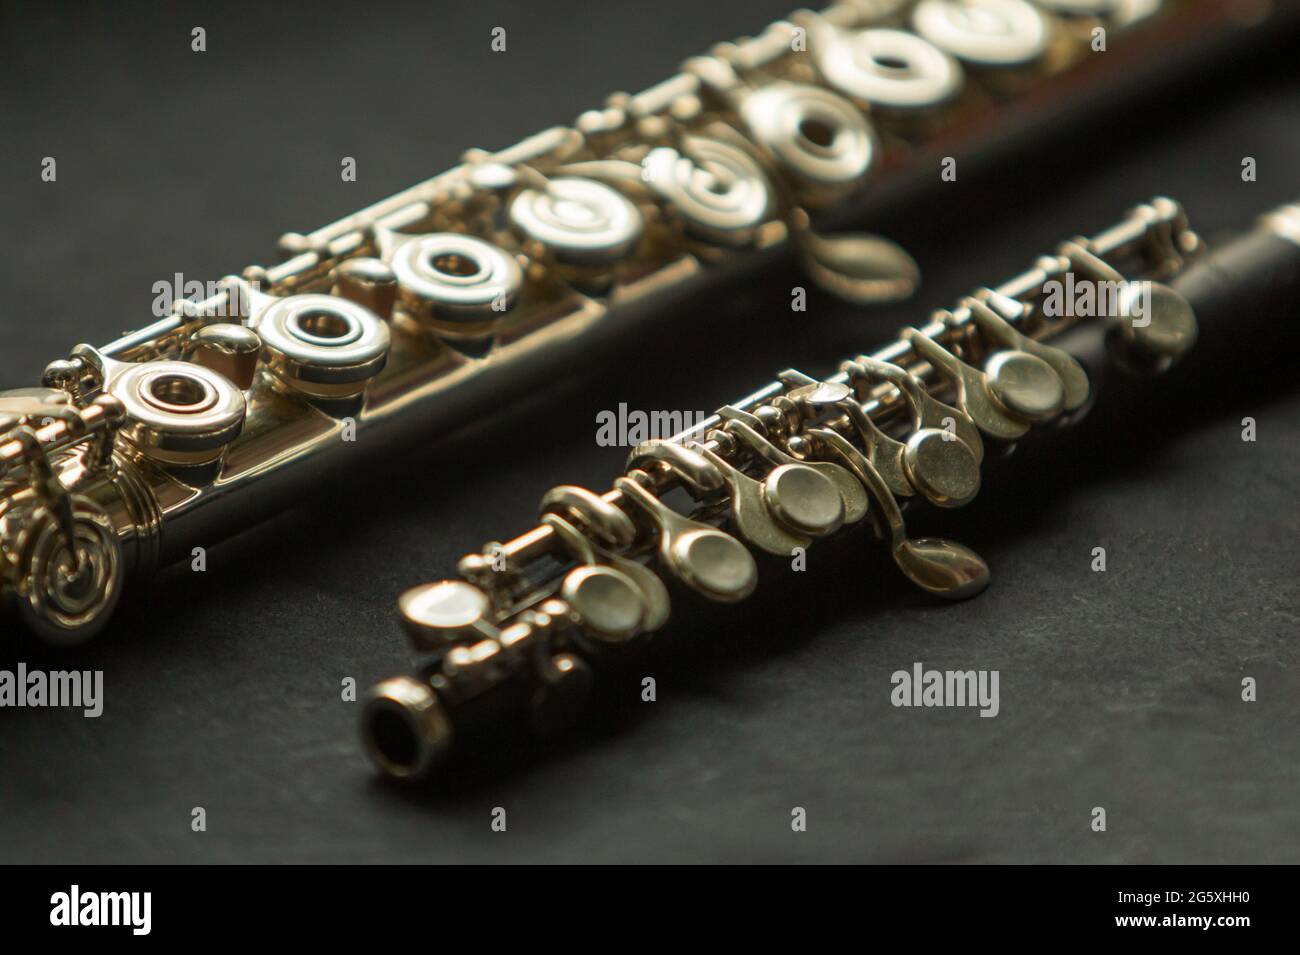 Musical wind instrument piccolo flute and brass flute Stock Photo - Alamy